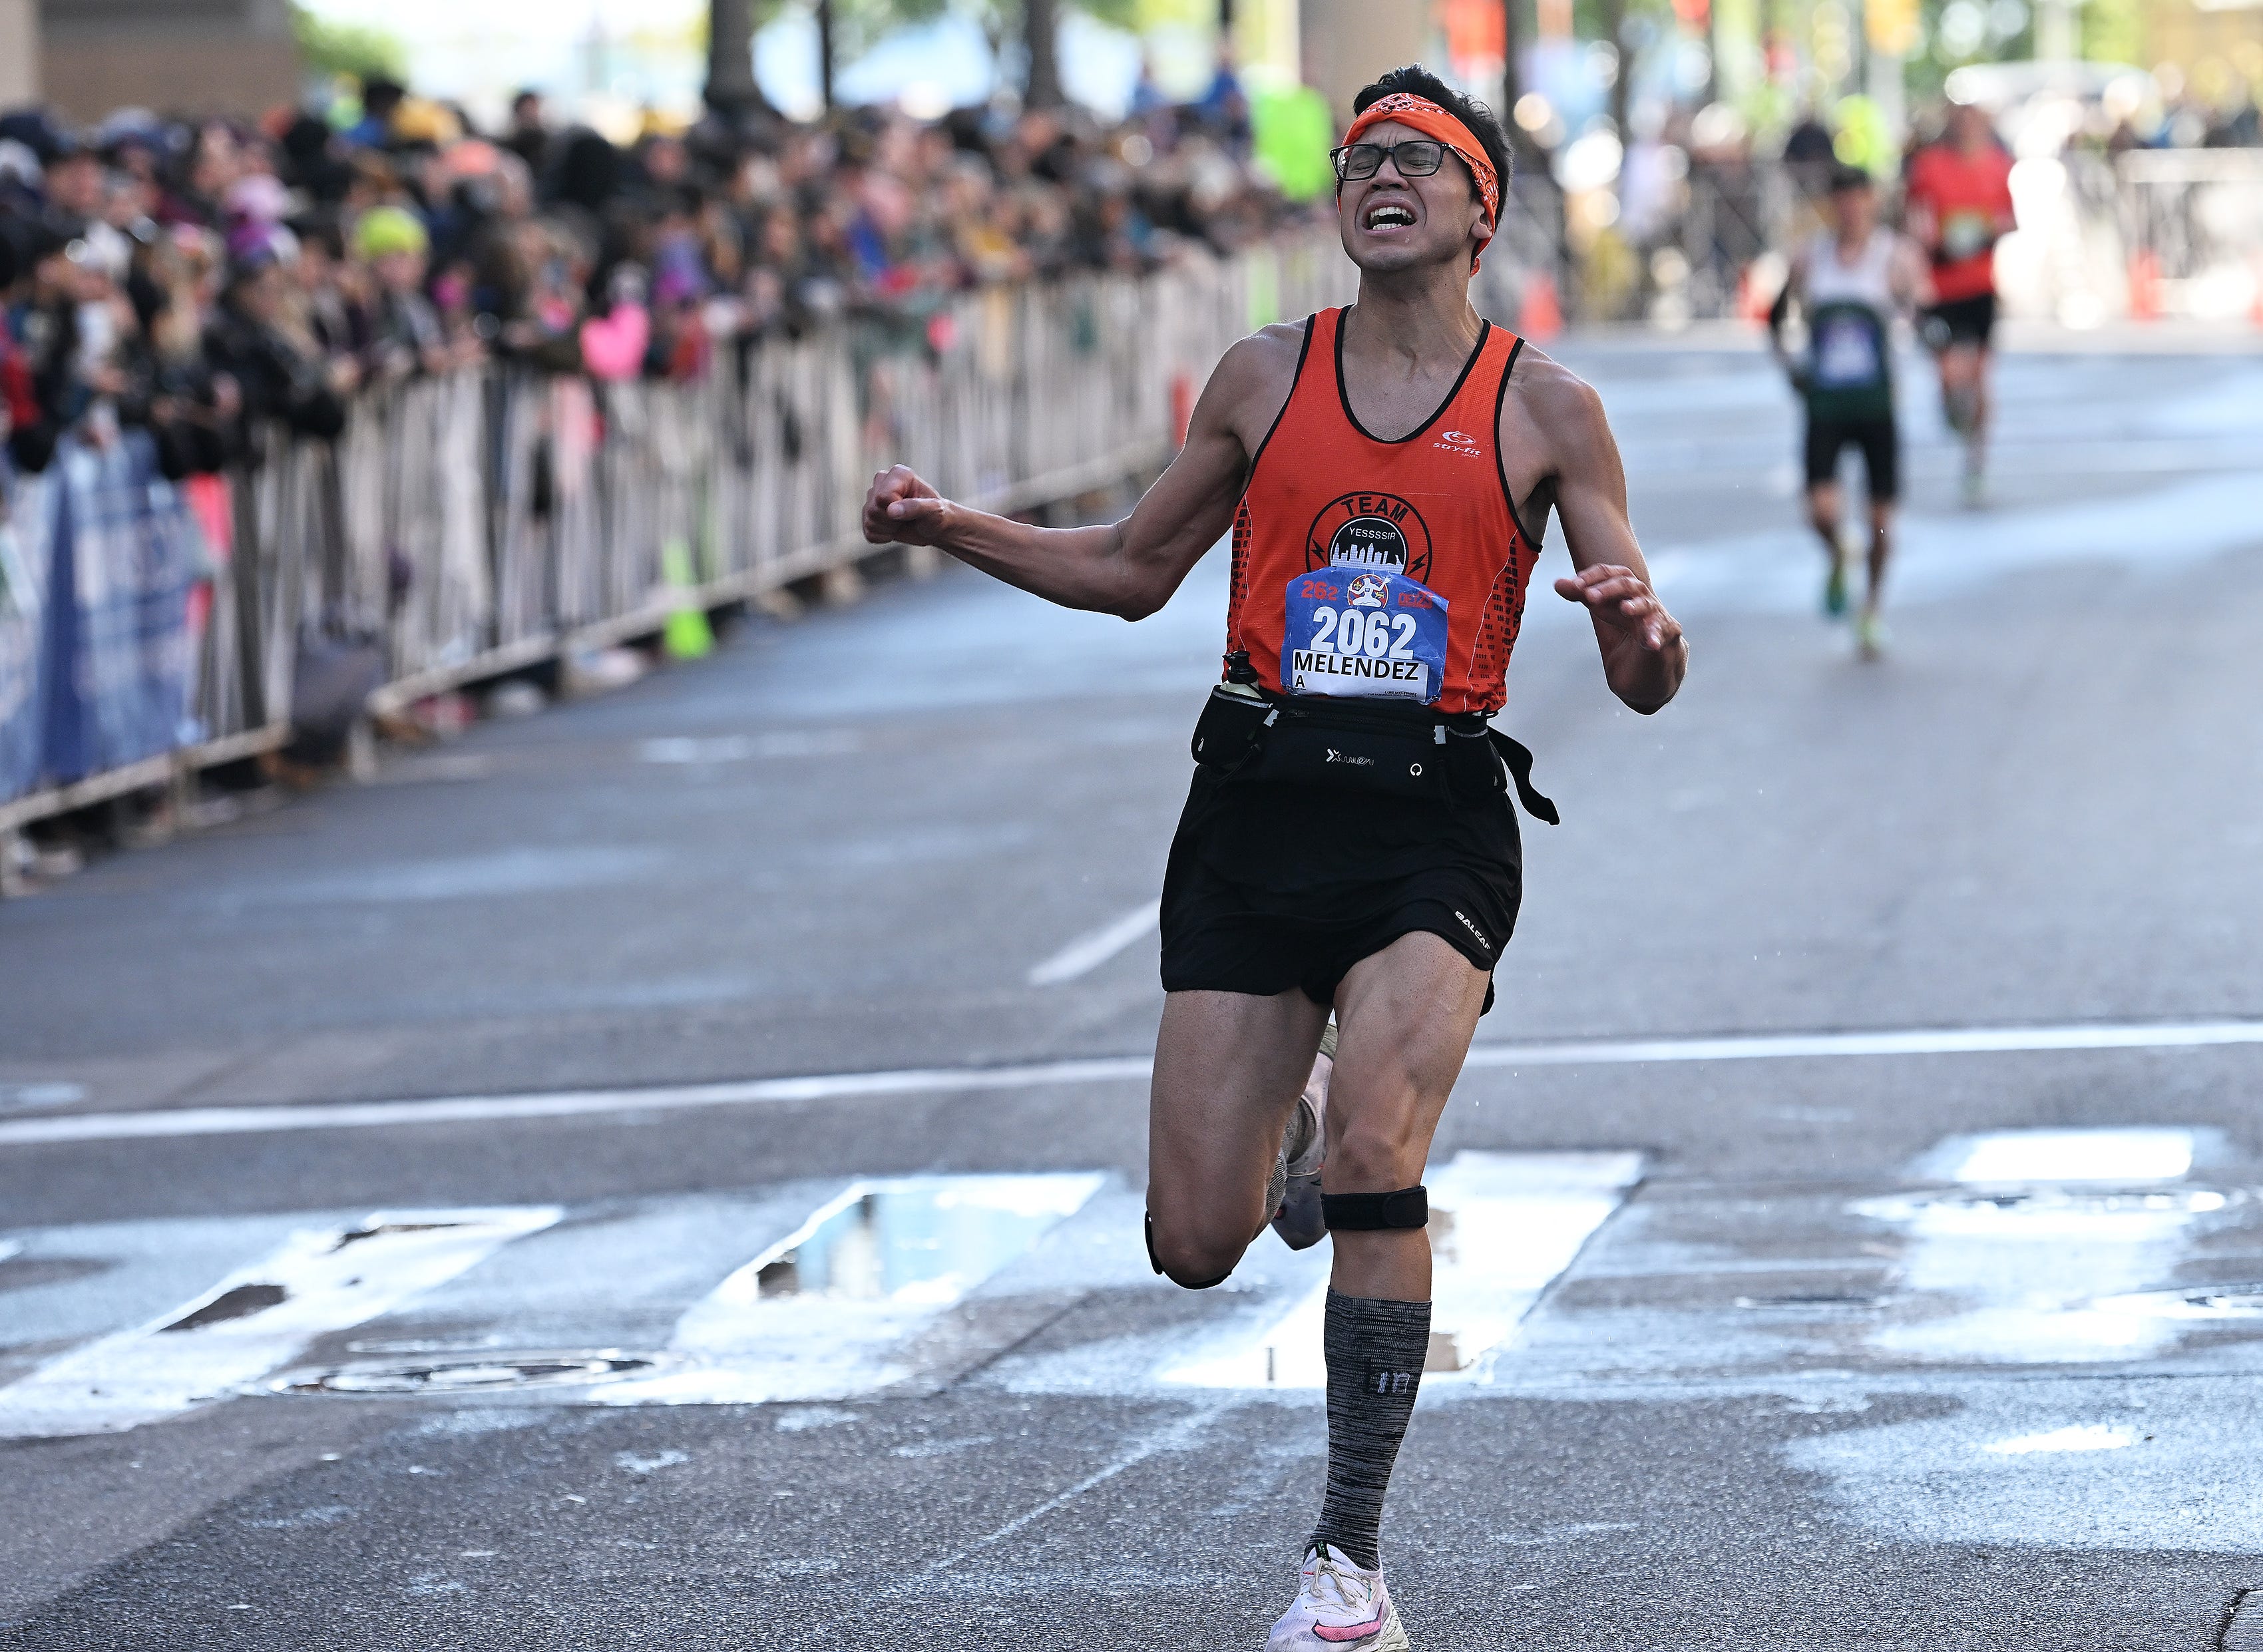 Luis Melendez, 22, of Windsor reacts as he finishes the full marathon at the Detroit Free Press Marathon in Detroit on Oct. 15, 2023. 
(Robin Buckson / The Detroit News)